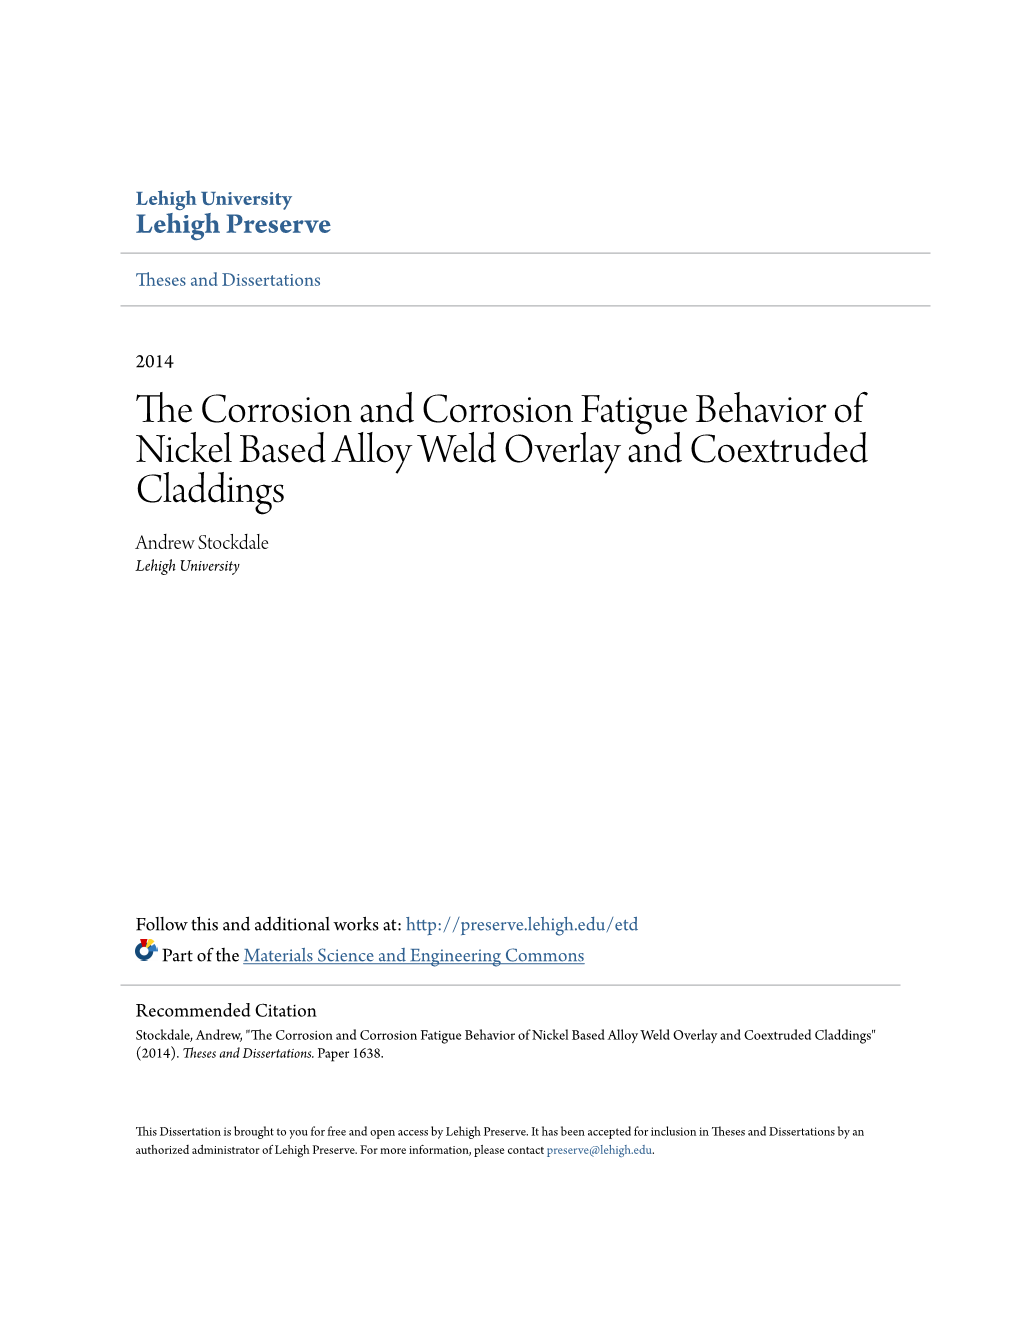 The Corrosion and Corrosion Fatigue Behavior of Nickel Based Alloy Weld Overlay and Coextruded Claddings